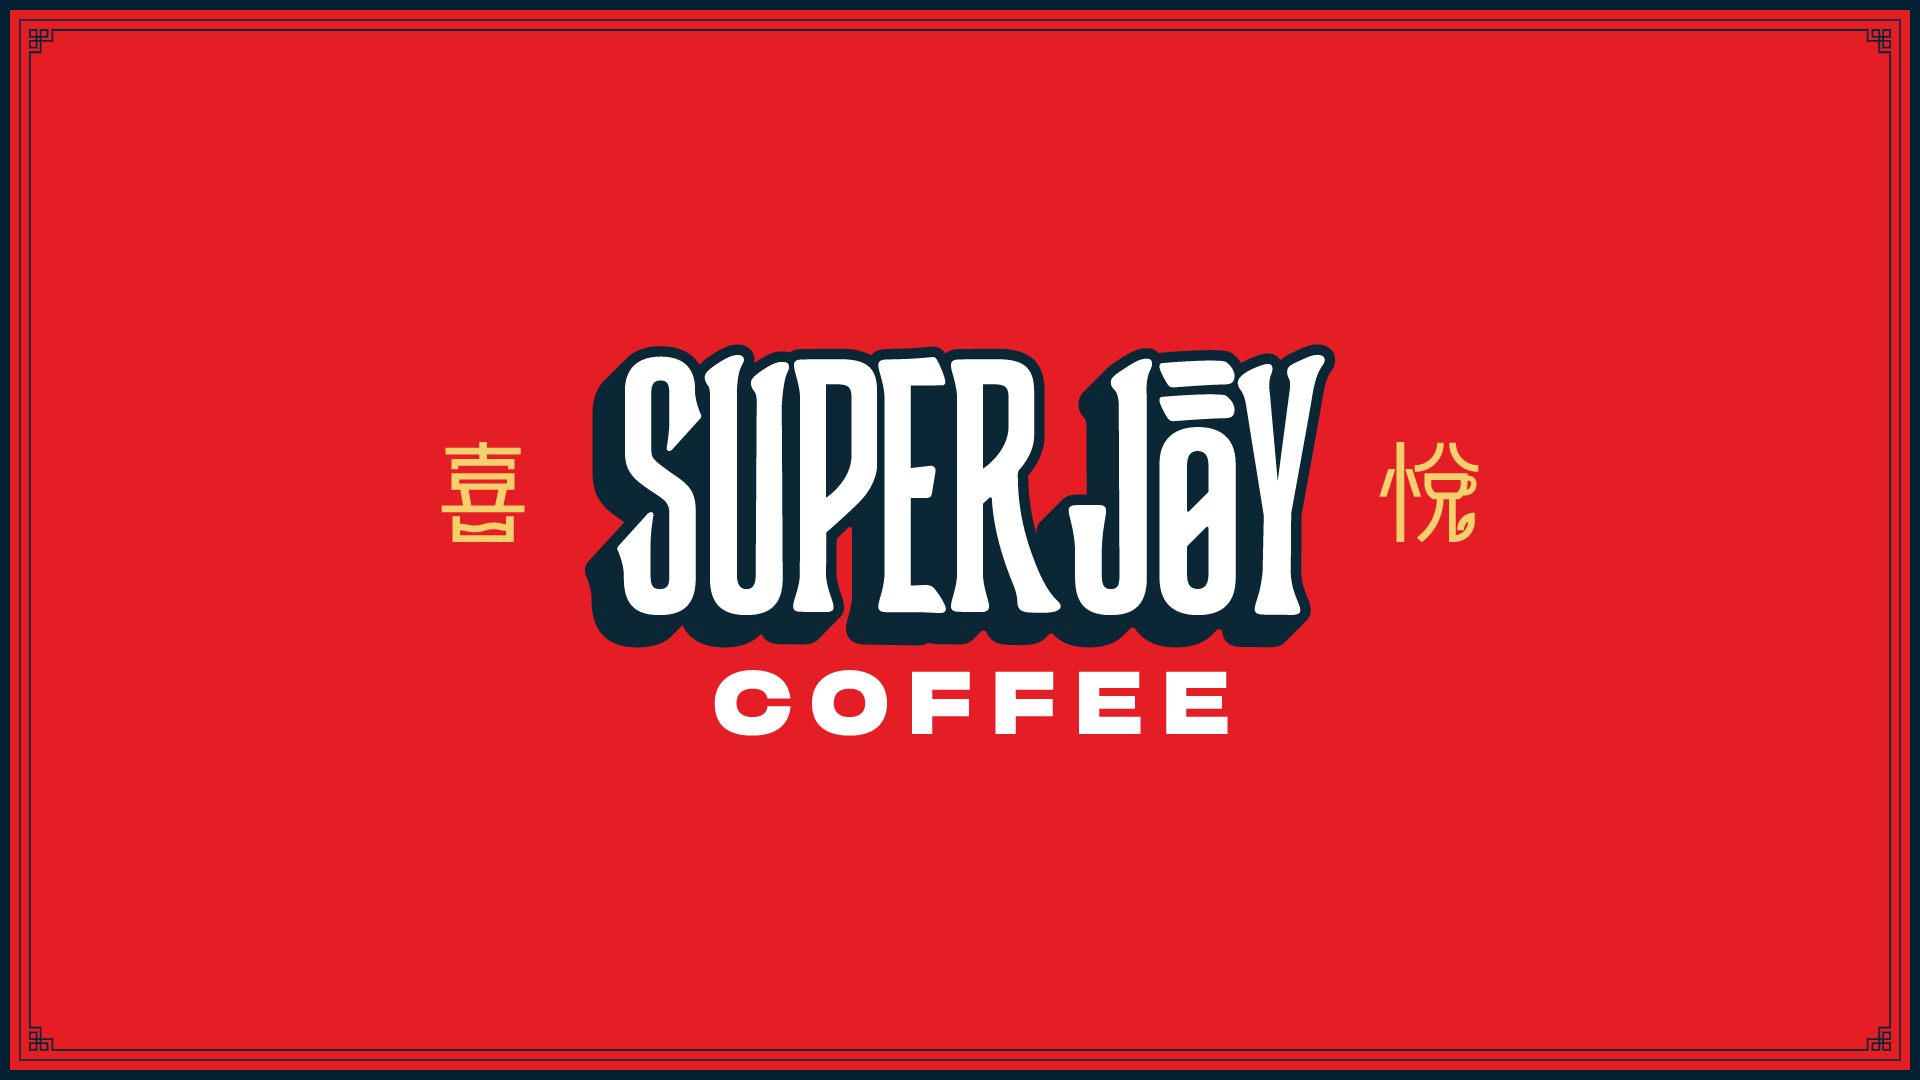 The Super Joy Coffee logo is navy blue and white text sitting on a red background. It features two Chinese characters on either side in yellow.